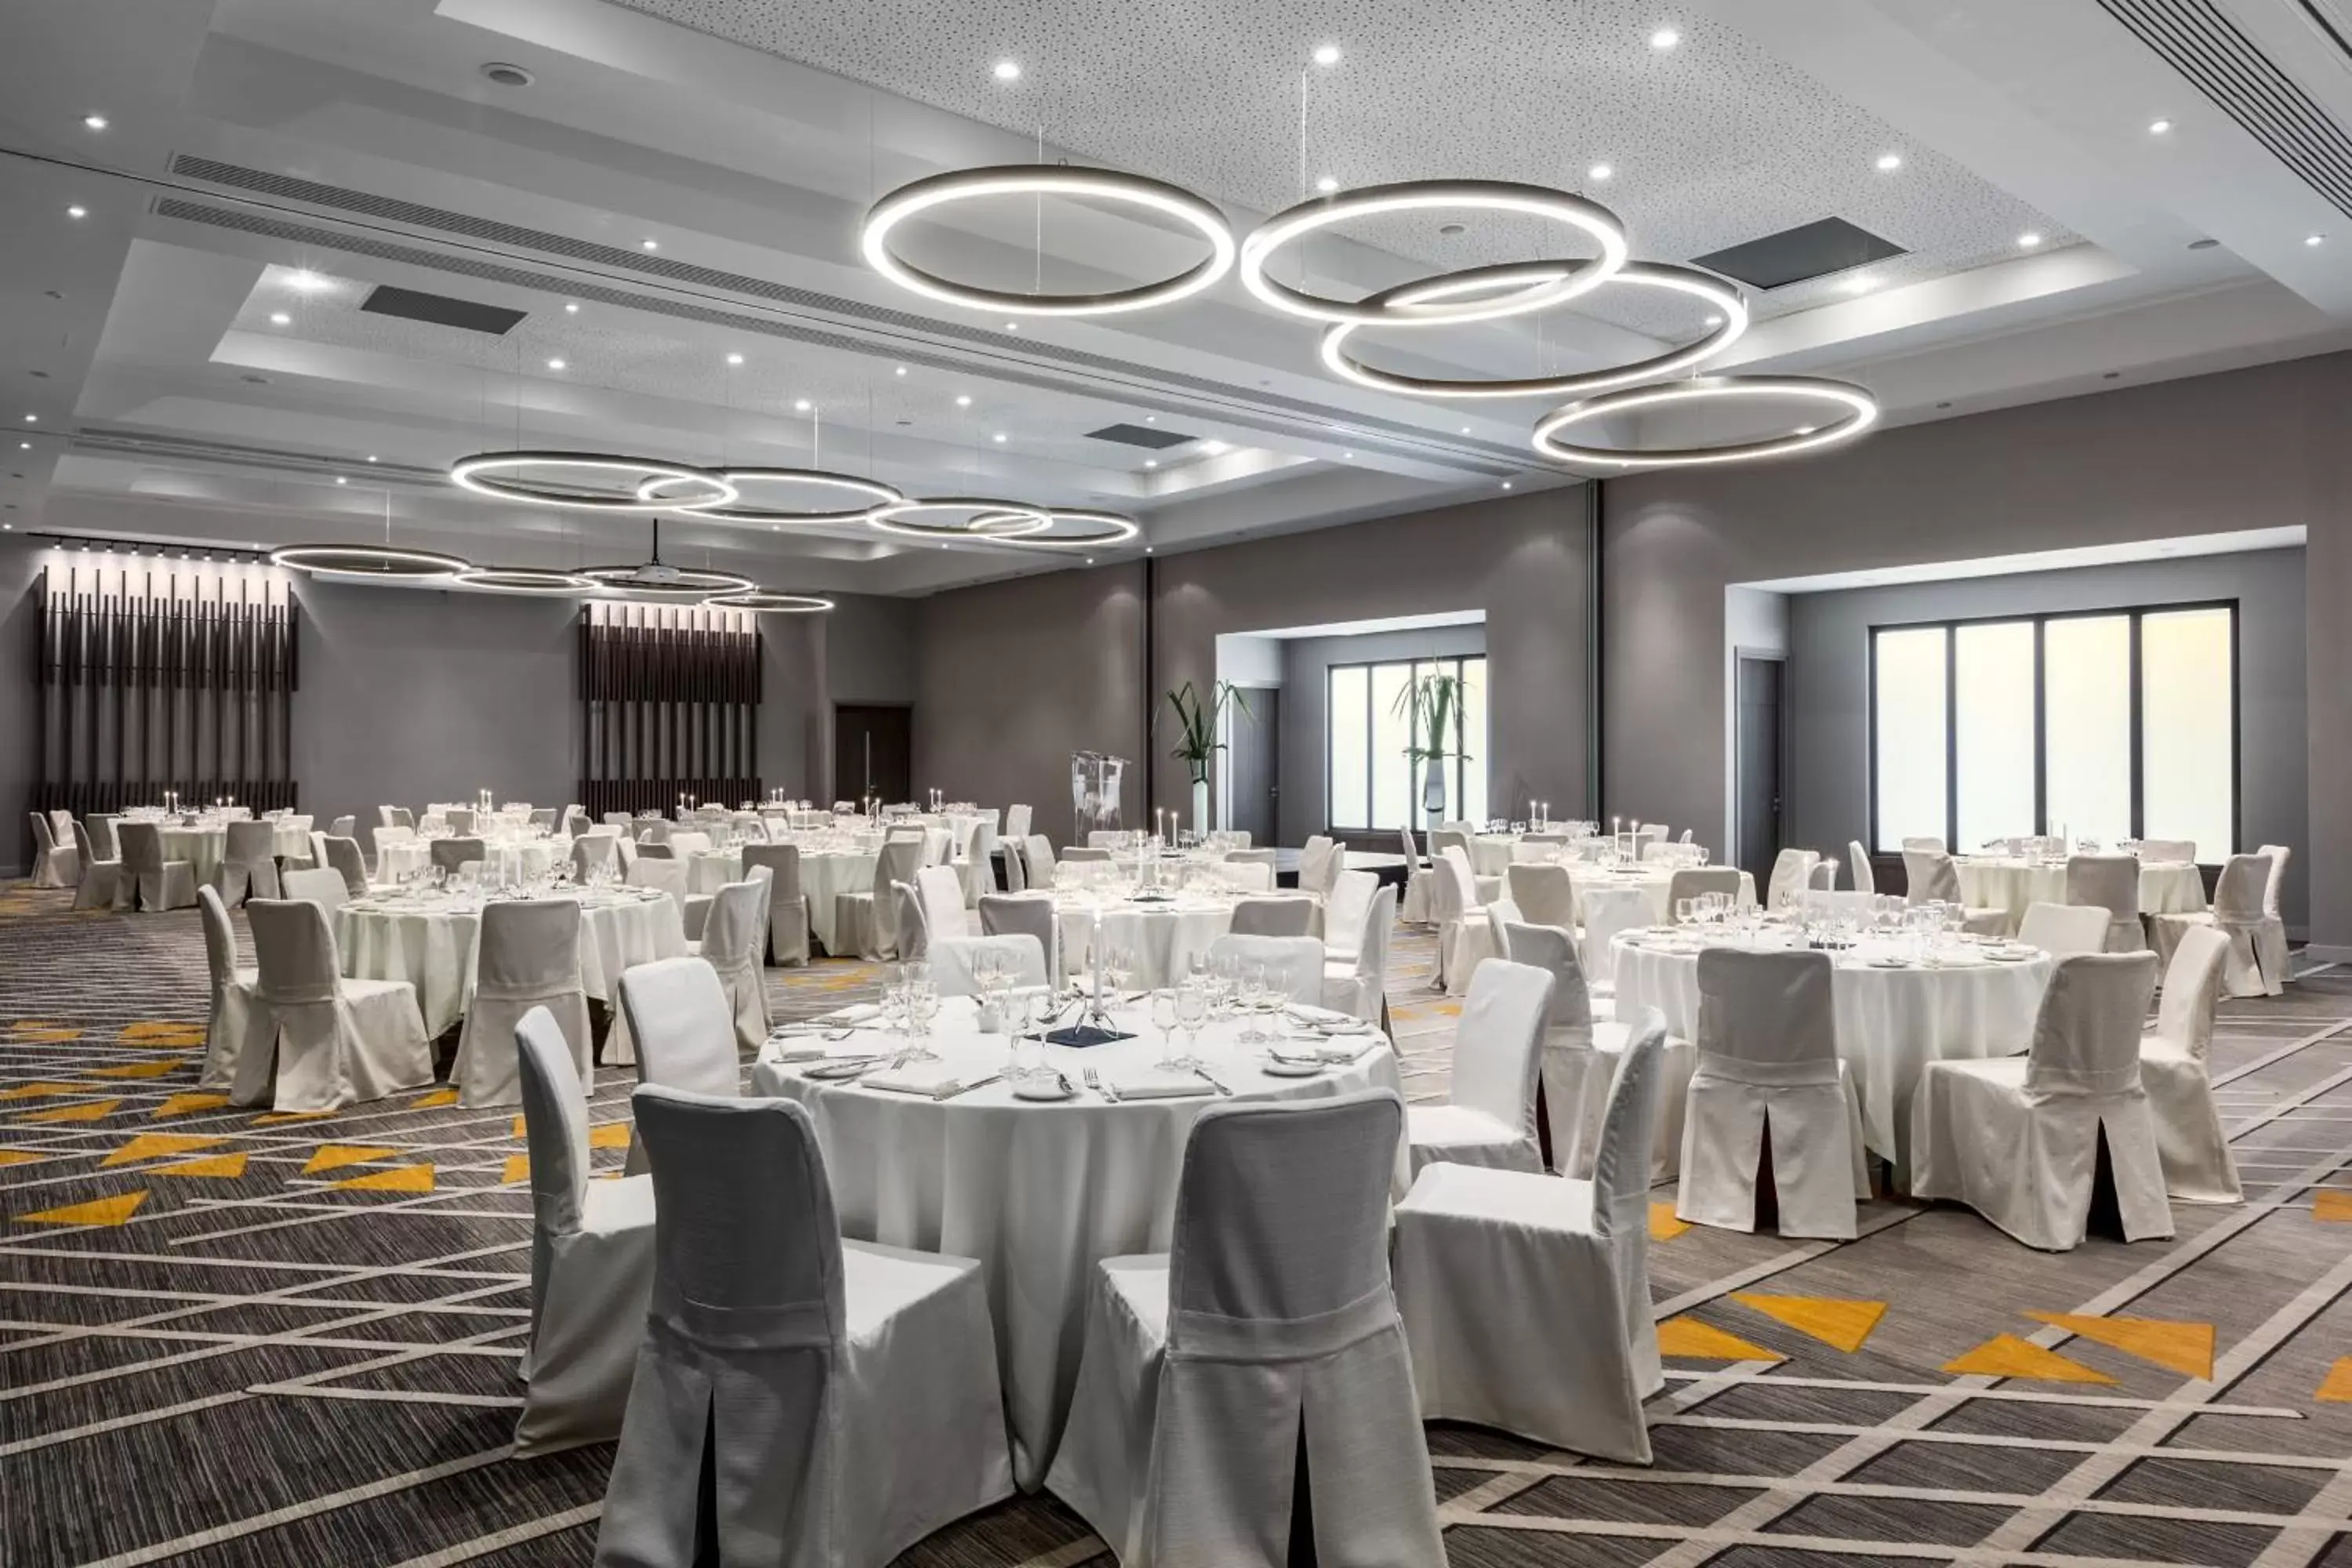 Meeting/conference room, Banquet Facilities in Paris Marriott Charles de Gaulle Airport Hotel